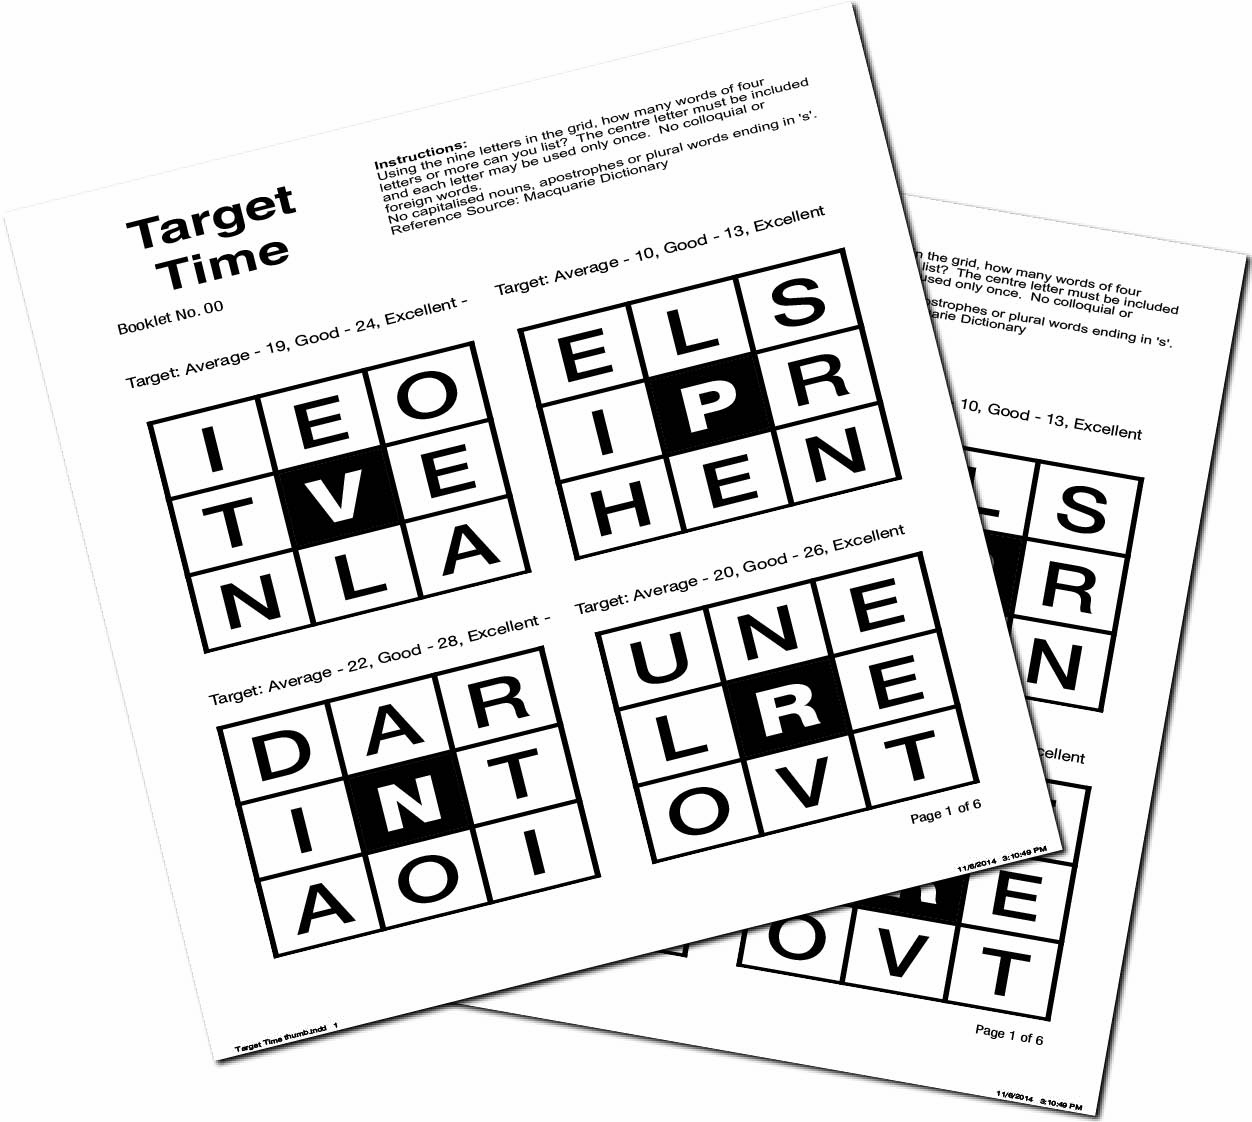 Image 1 for 20 TARGET TIME PUZZLE BOOKLET 02